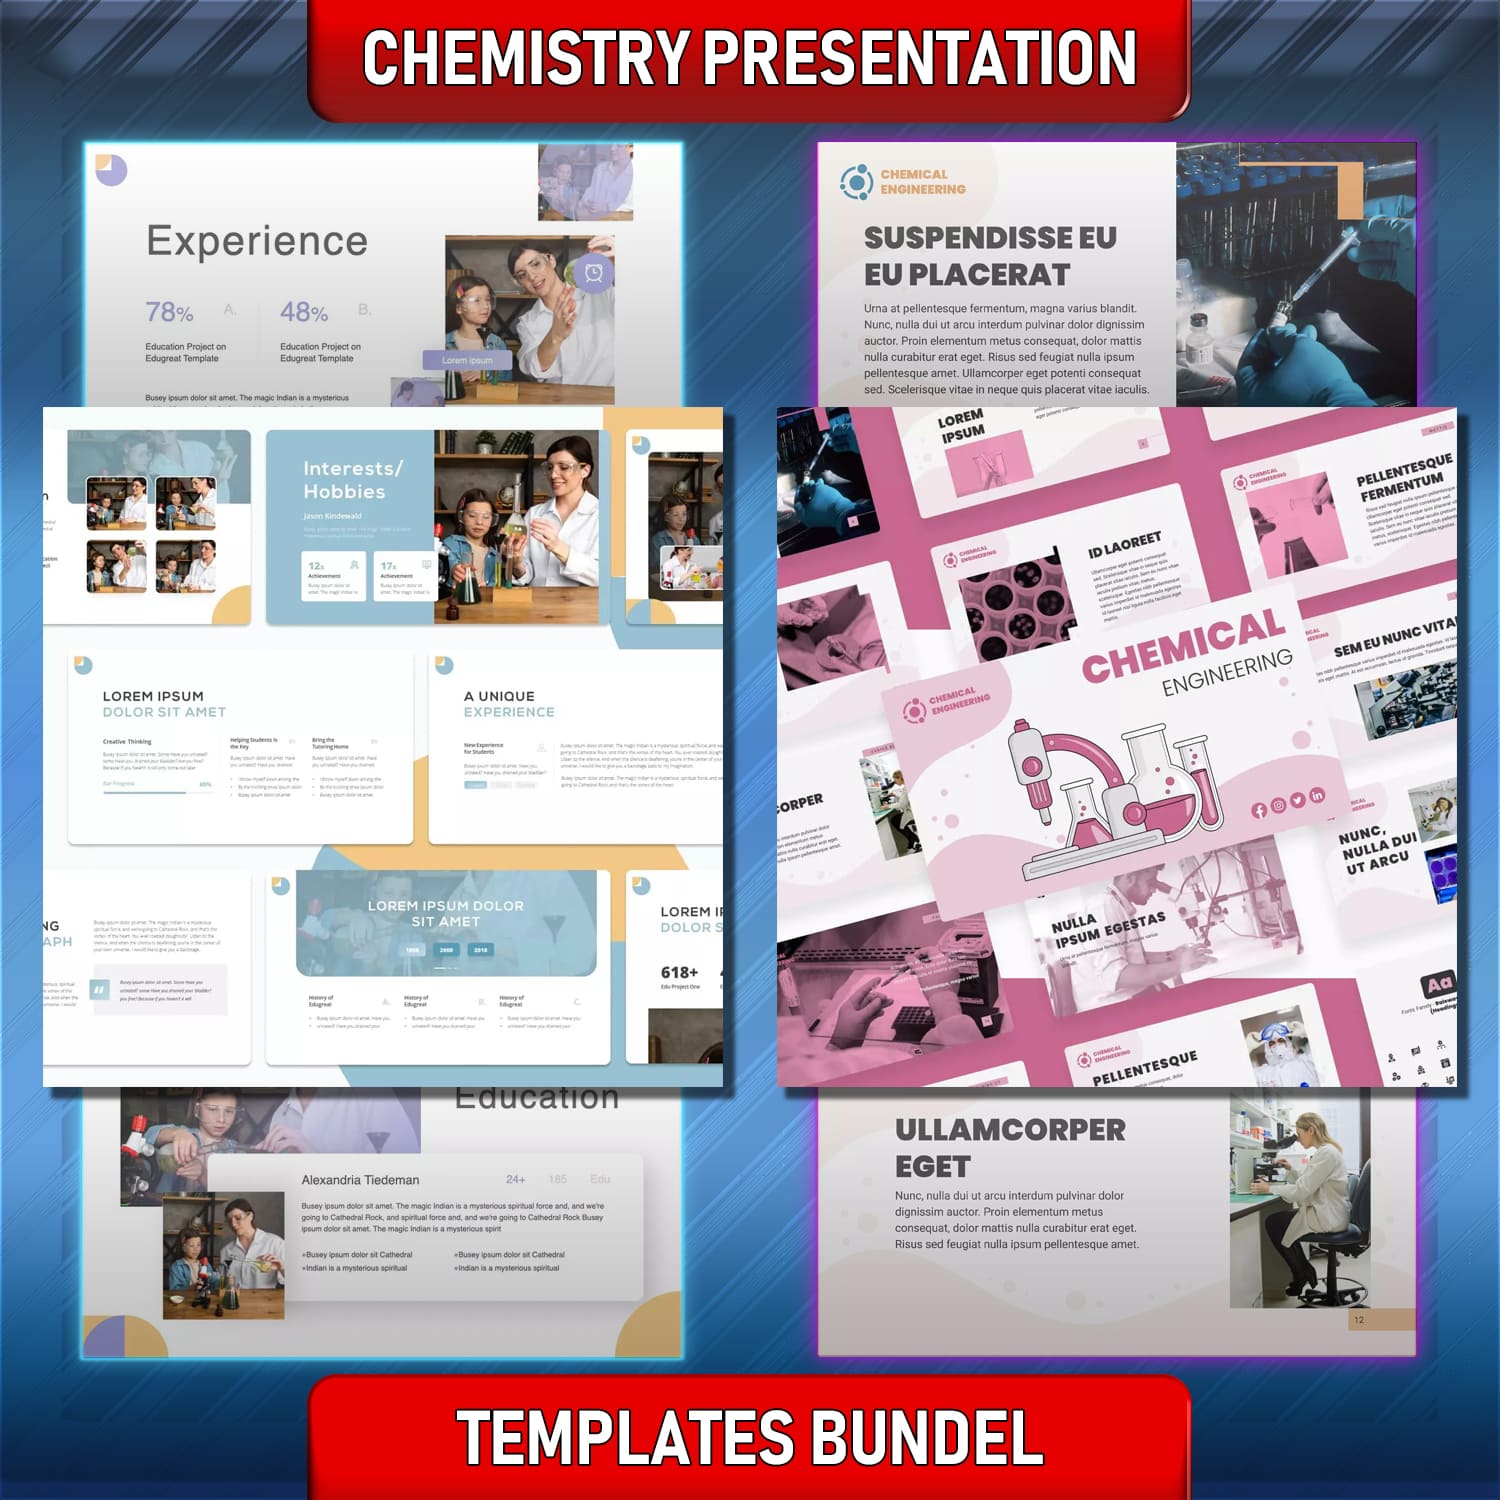 A selection of images of irresistible chemistry presentation slide templates.